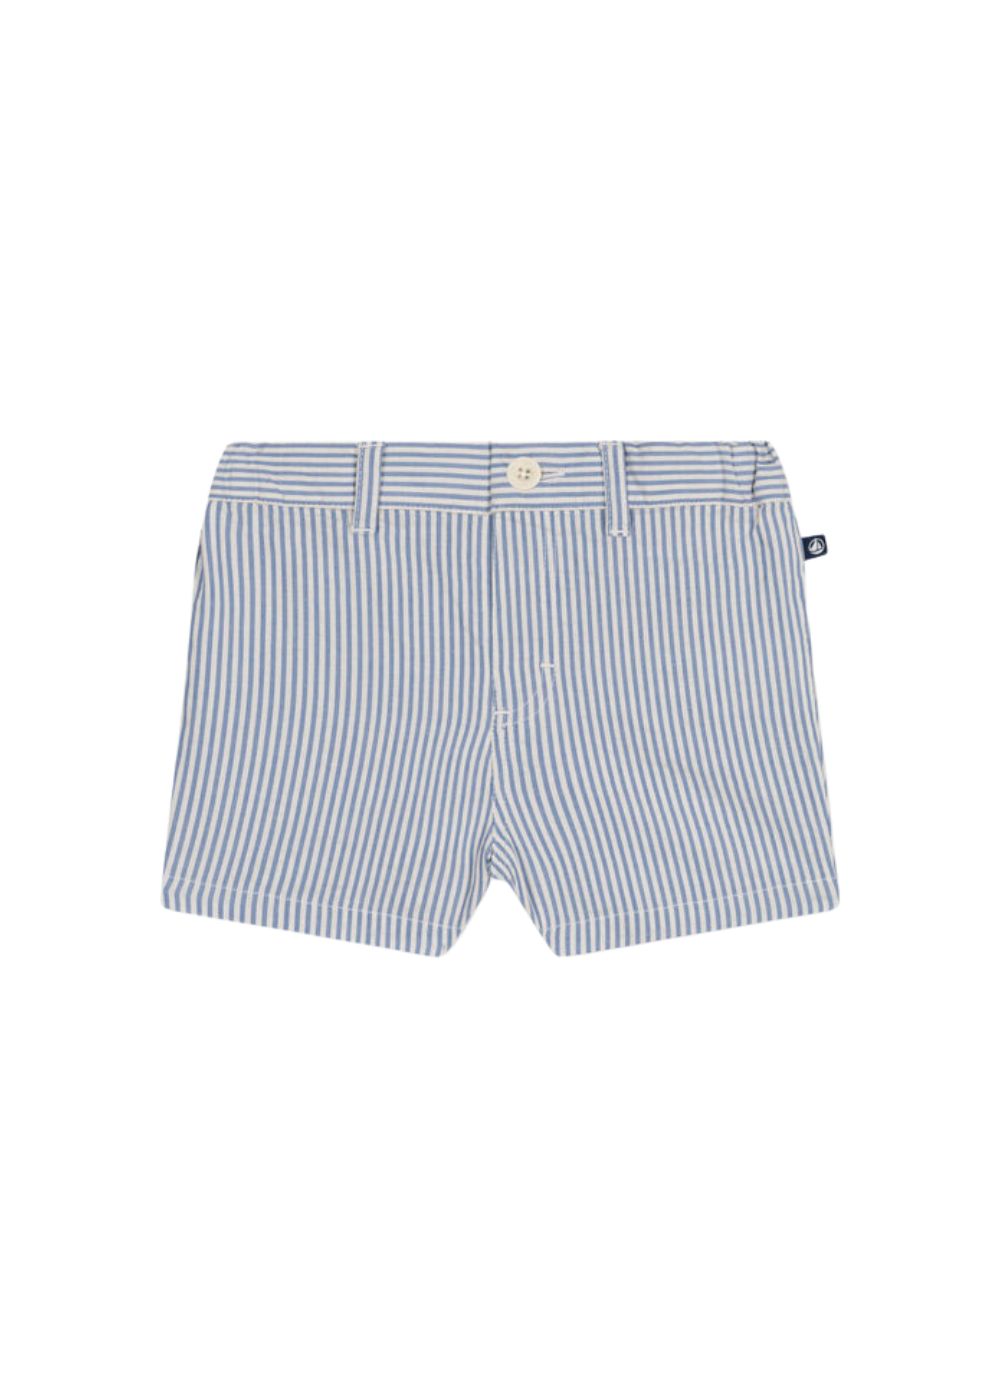 Featured image for “Petit Bateau Shorts in Seersucker”